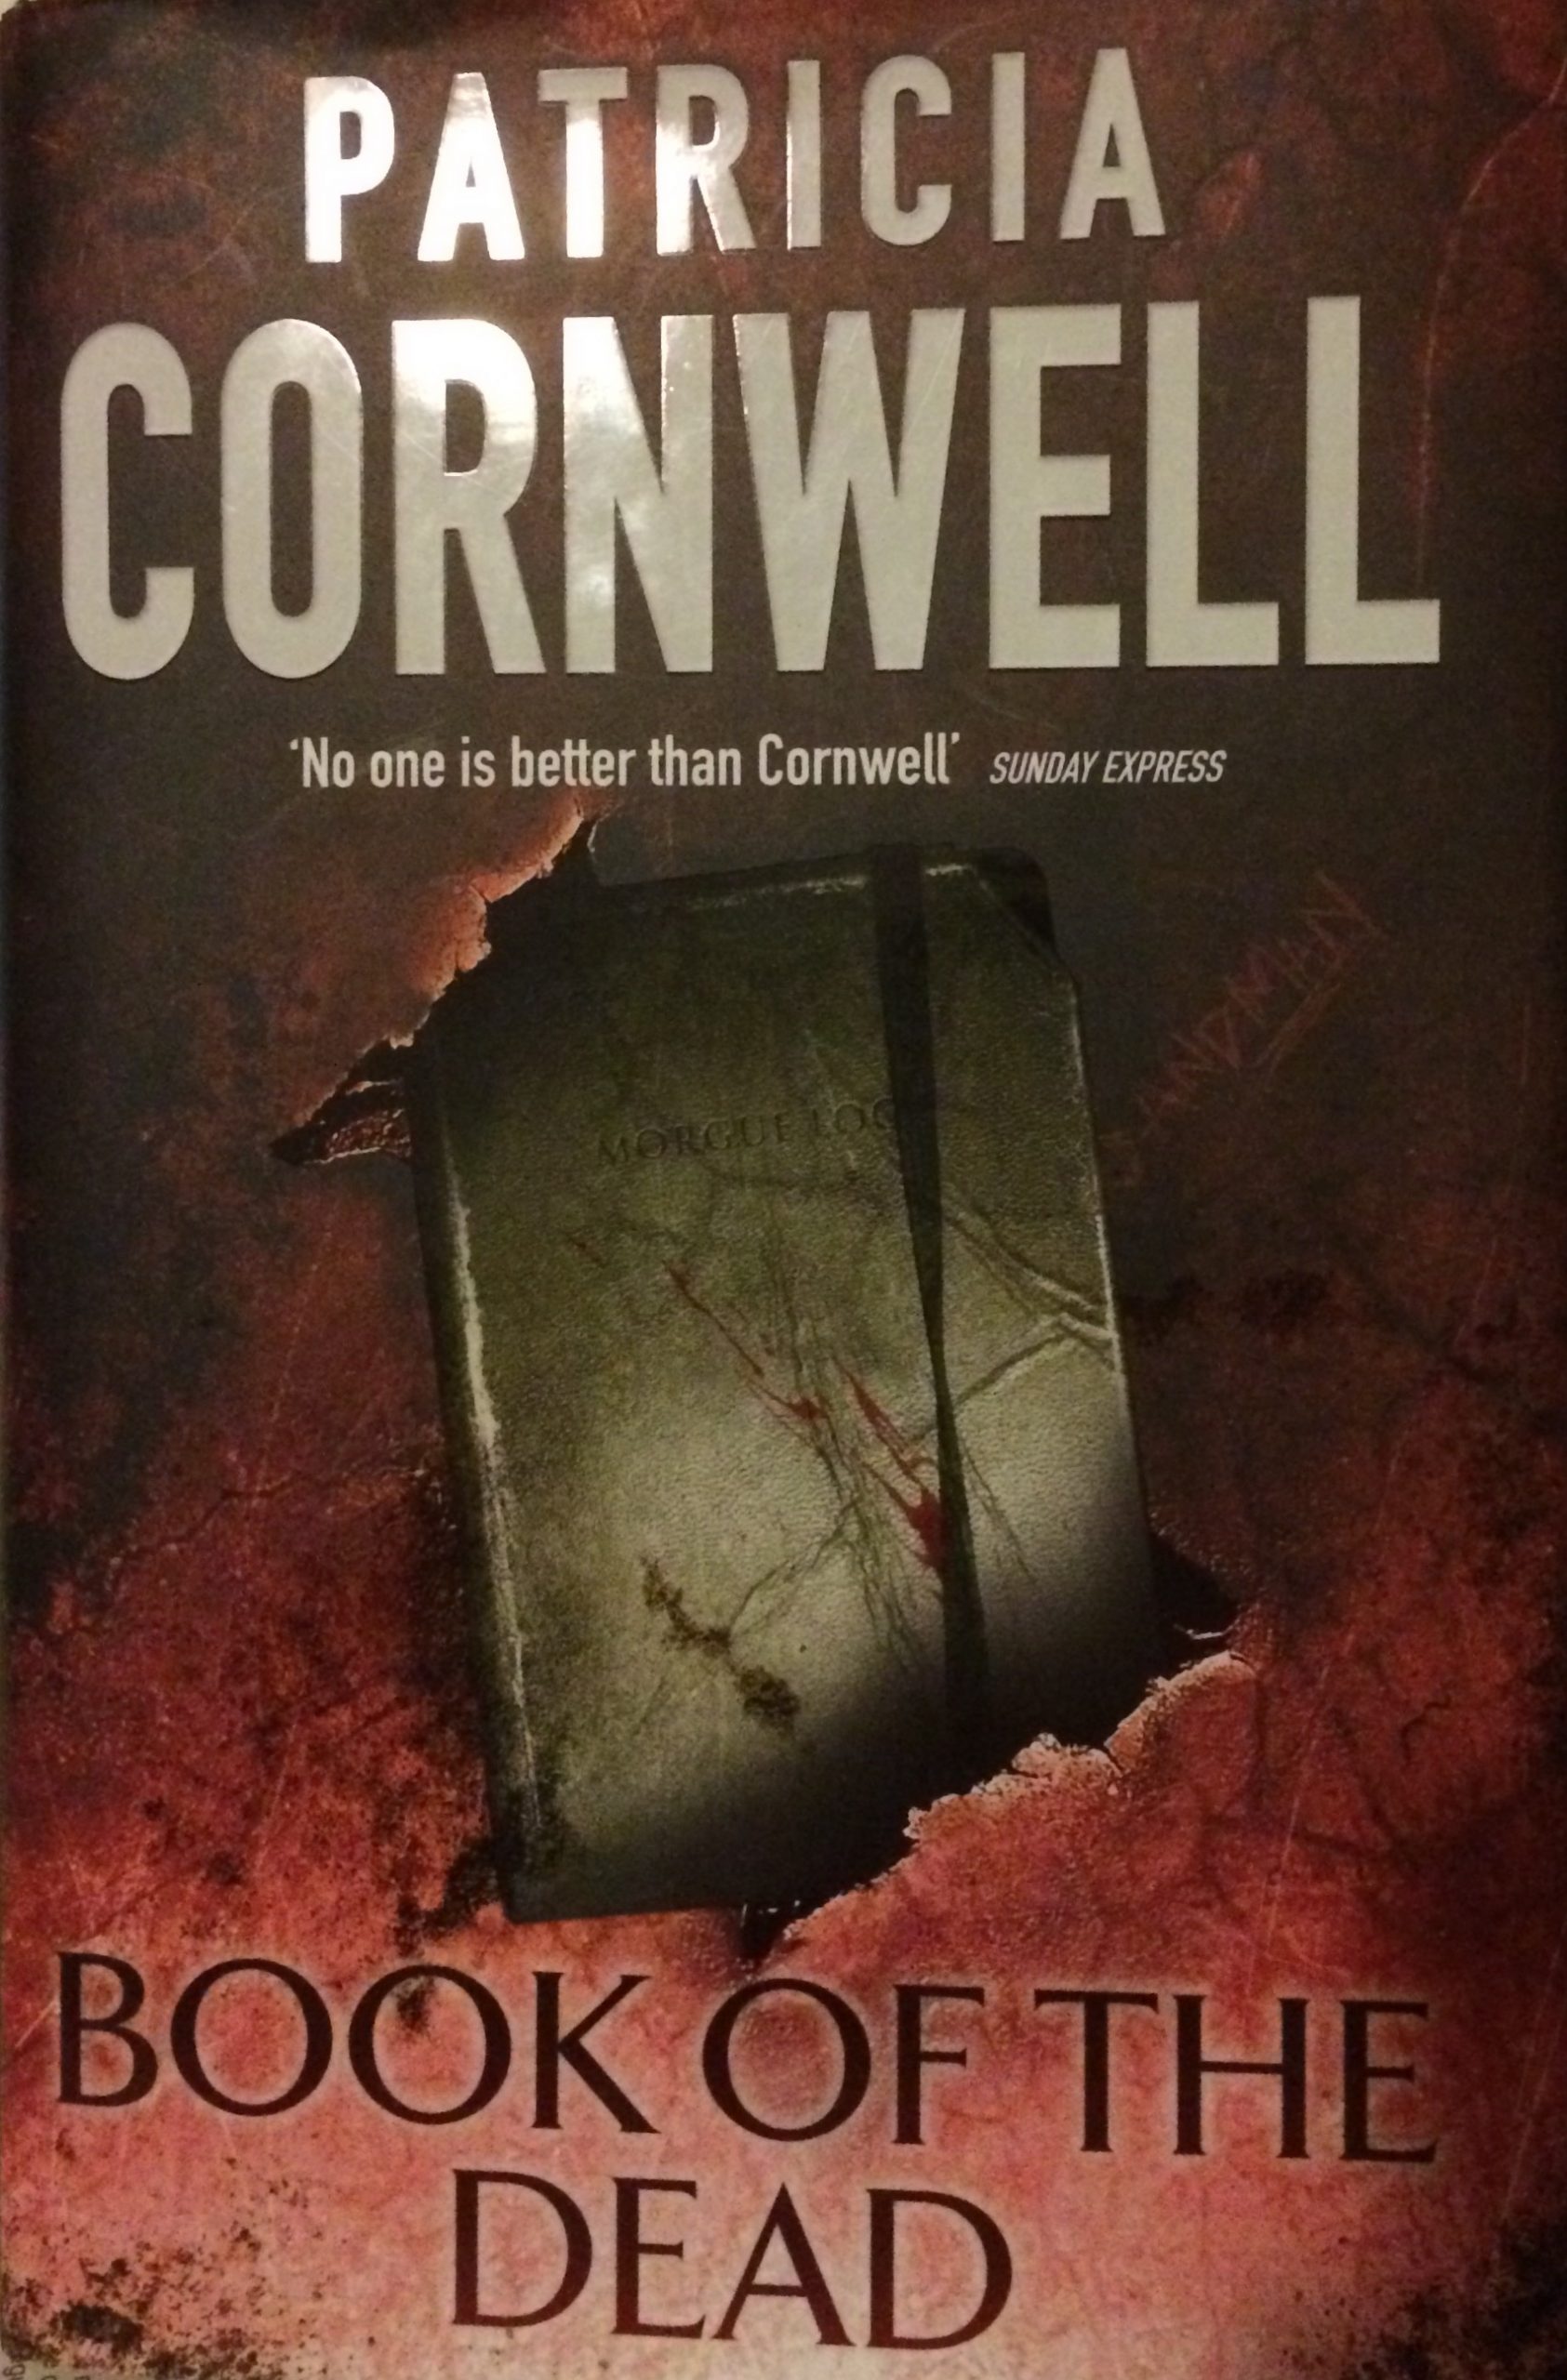 Book cover for Patricia Cornwell's 'Book of the Dead'